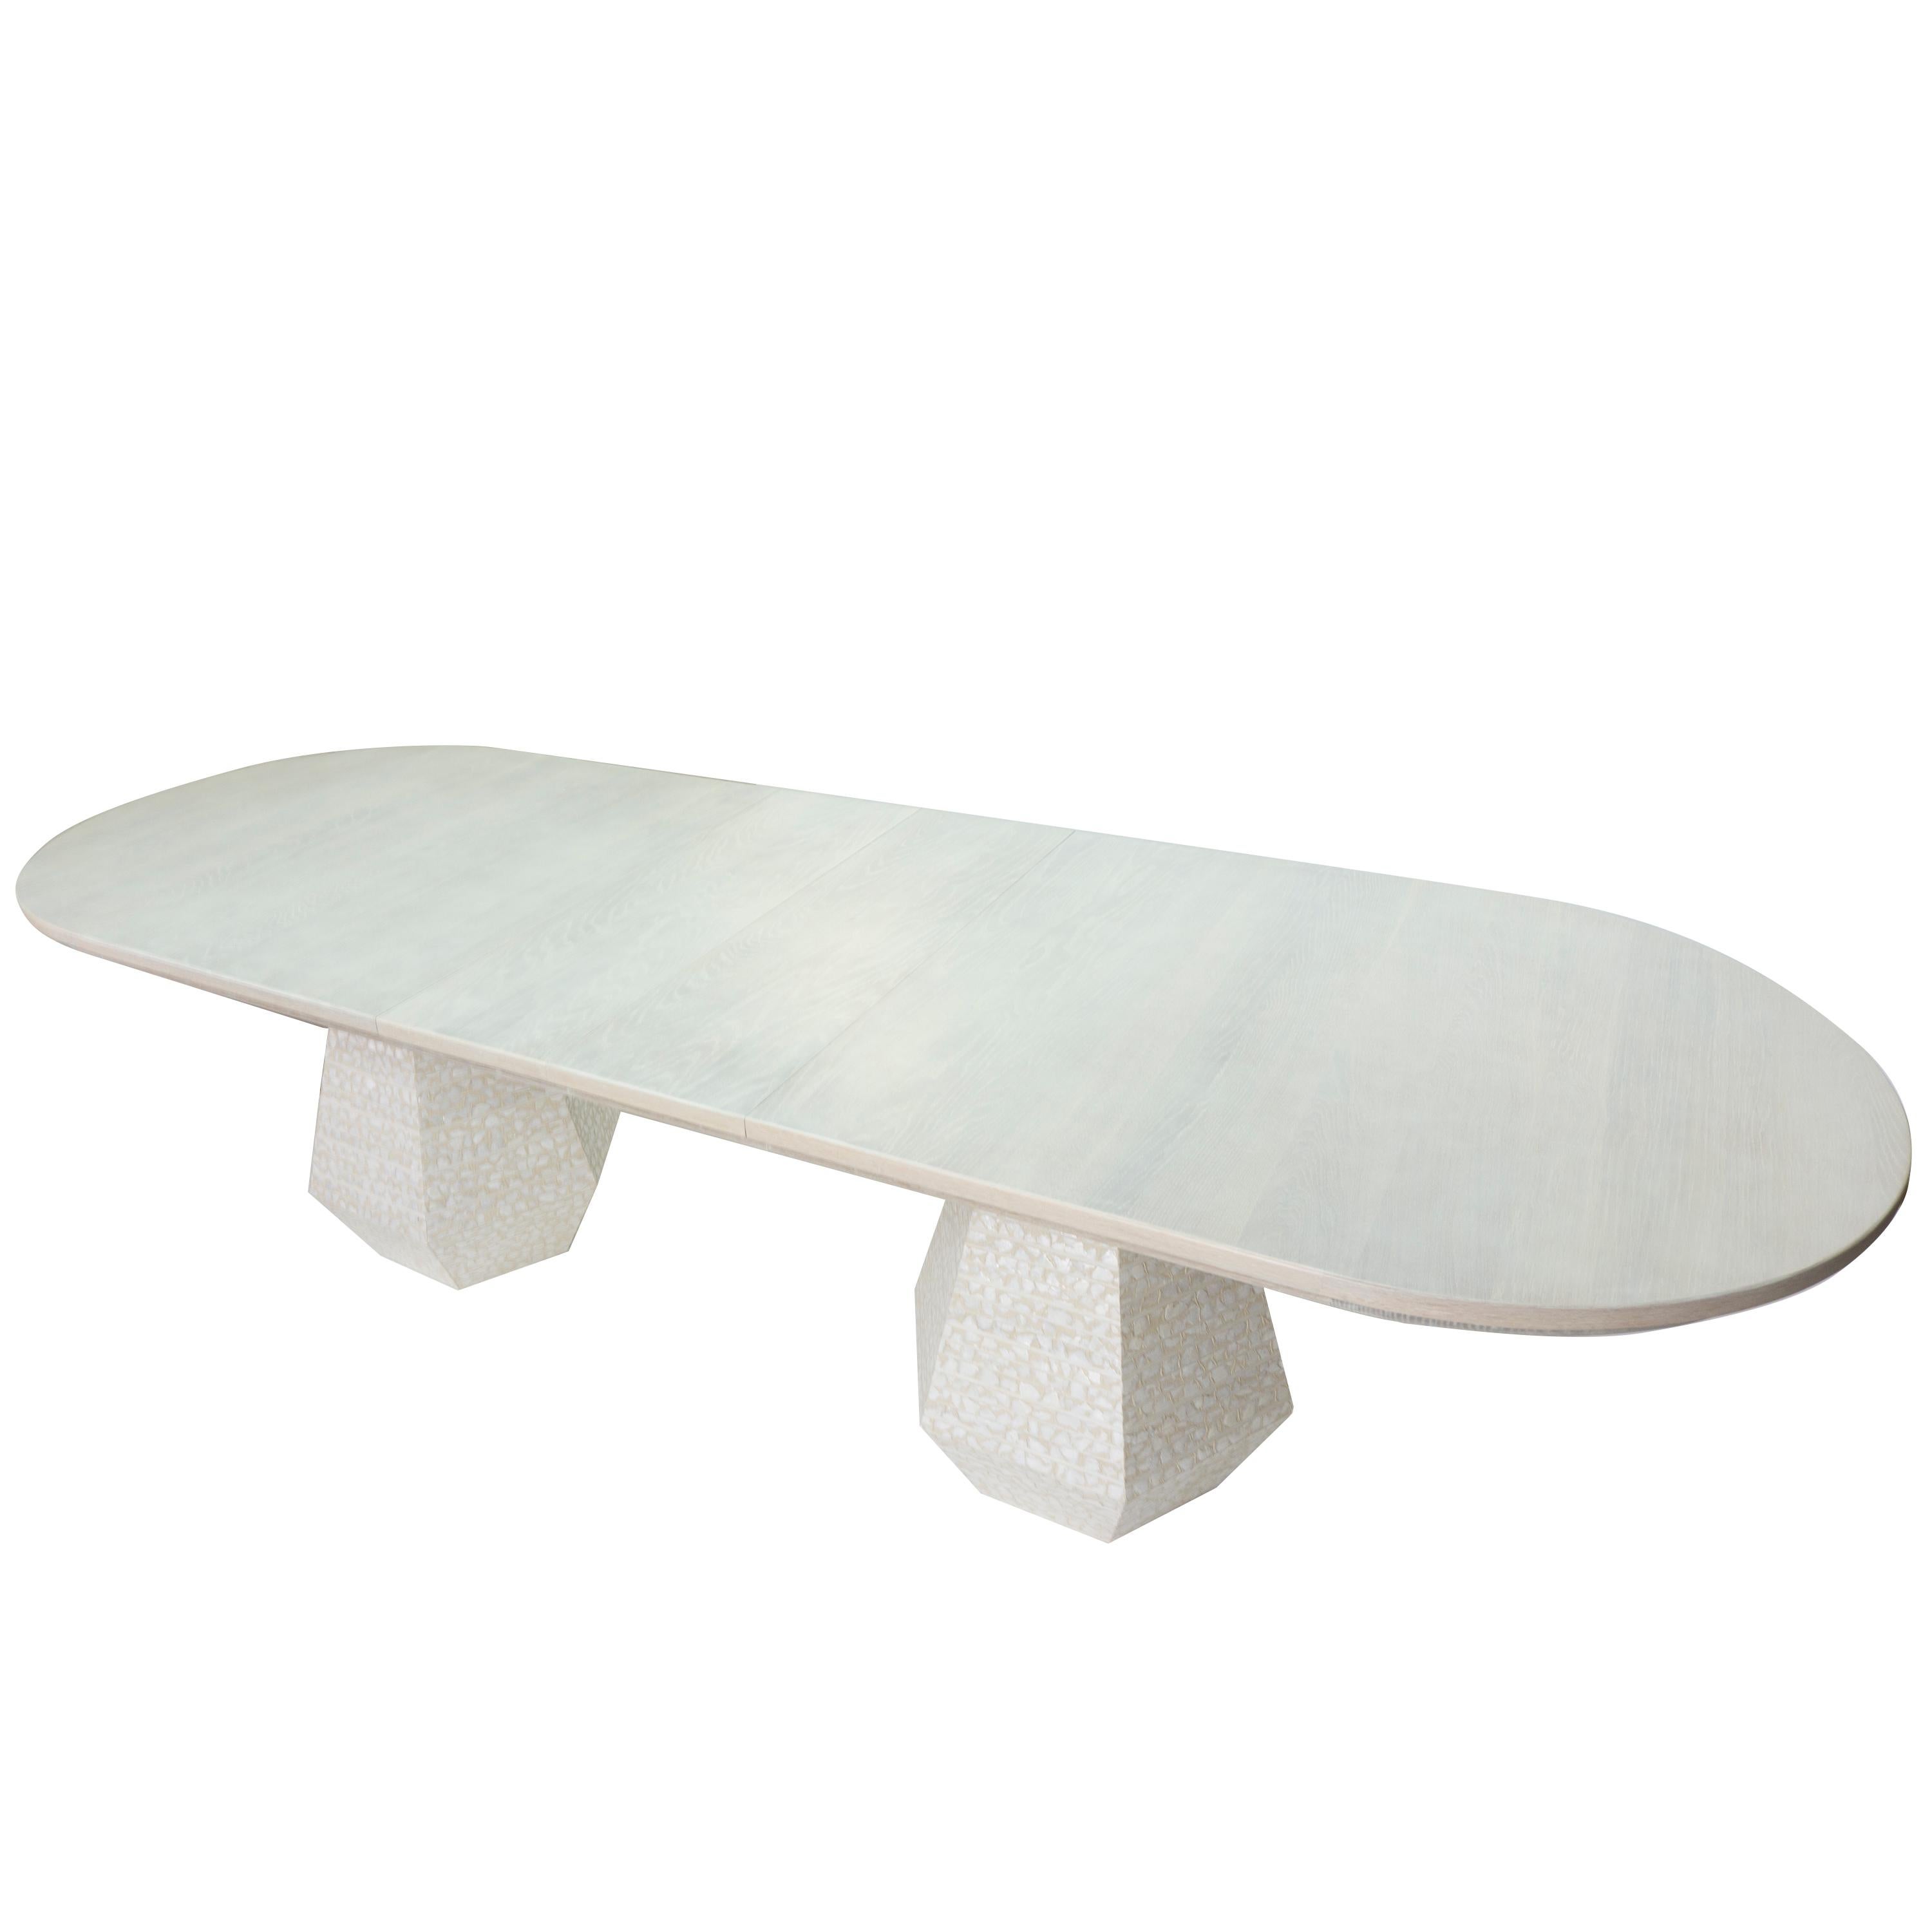 Our Capriz dining table is a postmodern design that is both minimal and spacious. The table features 2 hexagonal bases wrapped in a mother of pearl finish. The white oak top is lightly finished in cotton white and includes two extension leaves for a